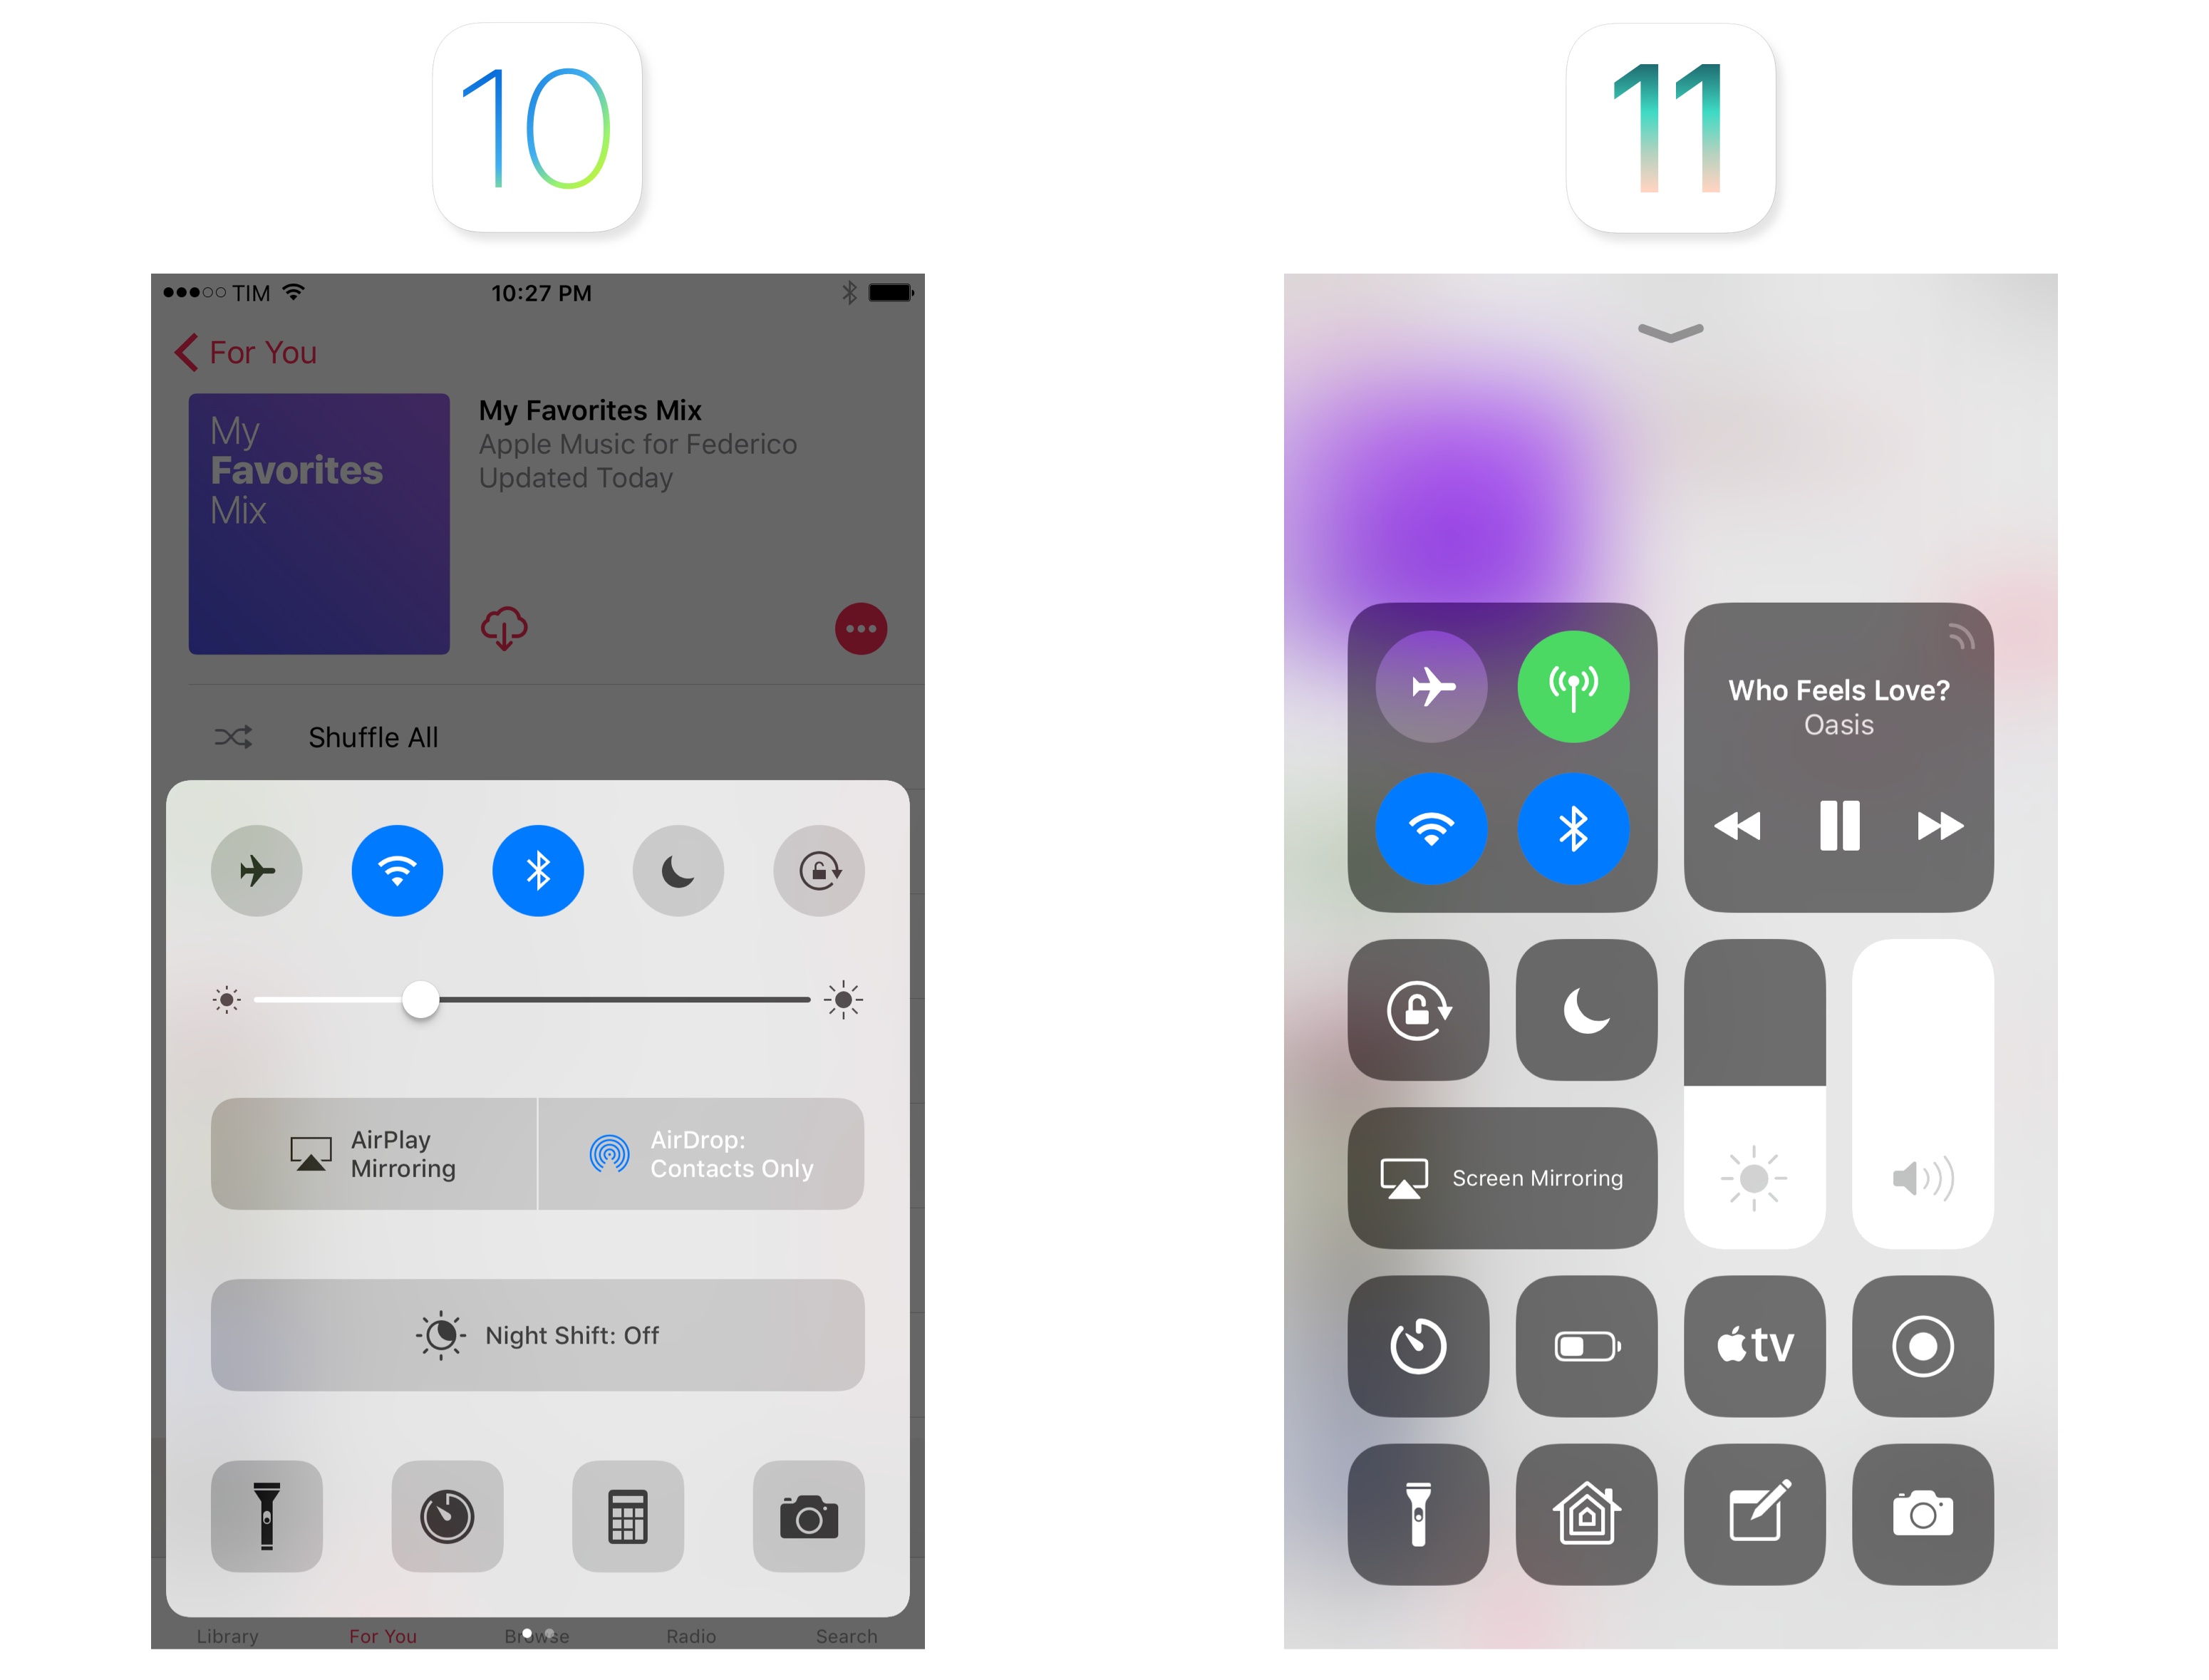 The difference from iOS 10's Control Center is striking.